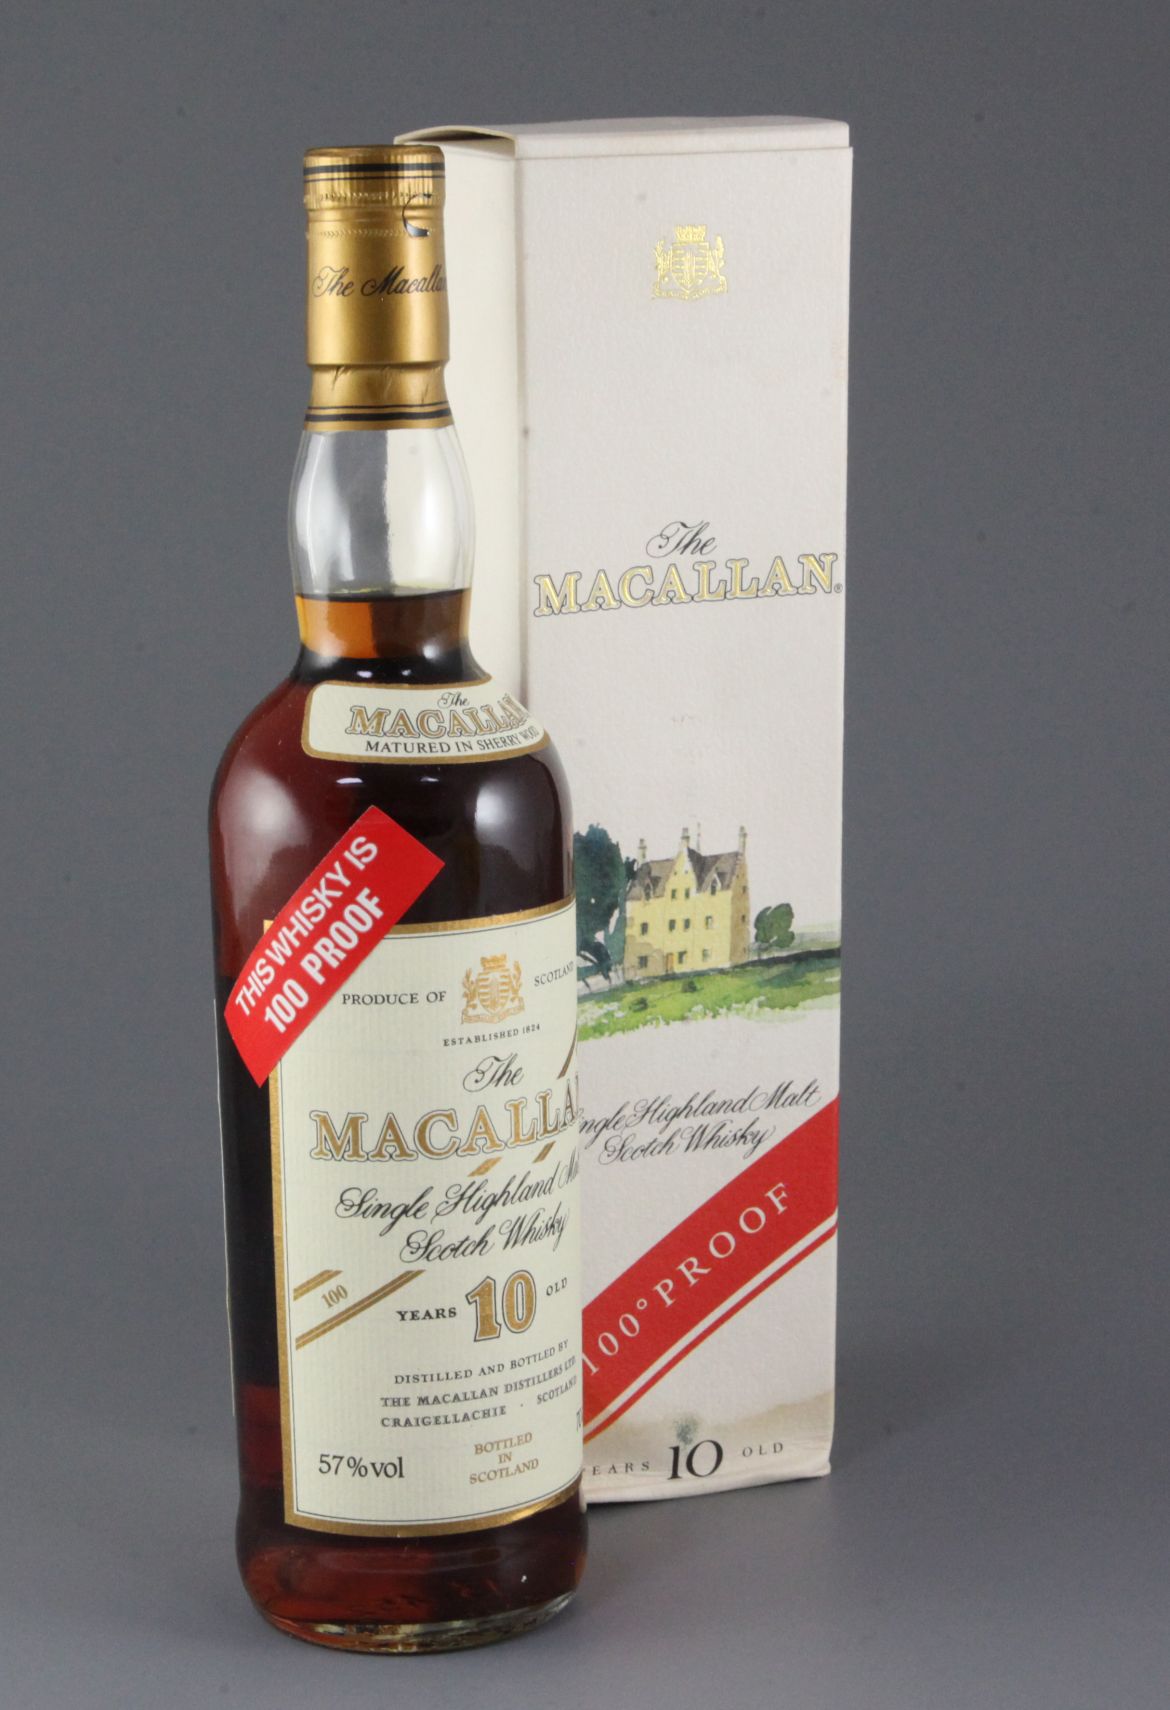 One bottle of The Macallan 10 Years Old 100% proof red label Single Highland Malt Scotch Whisky,